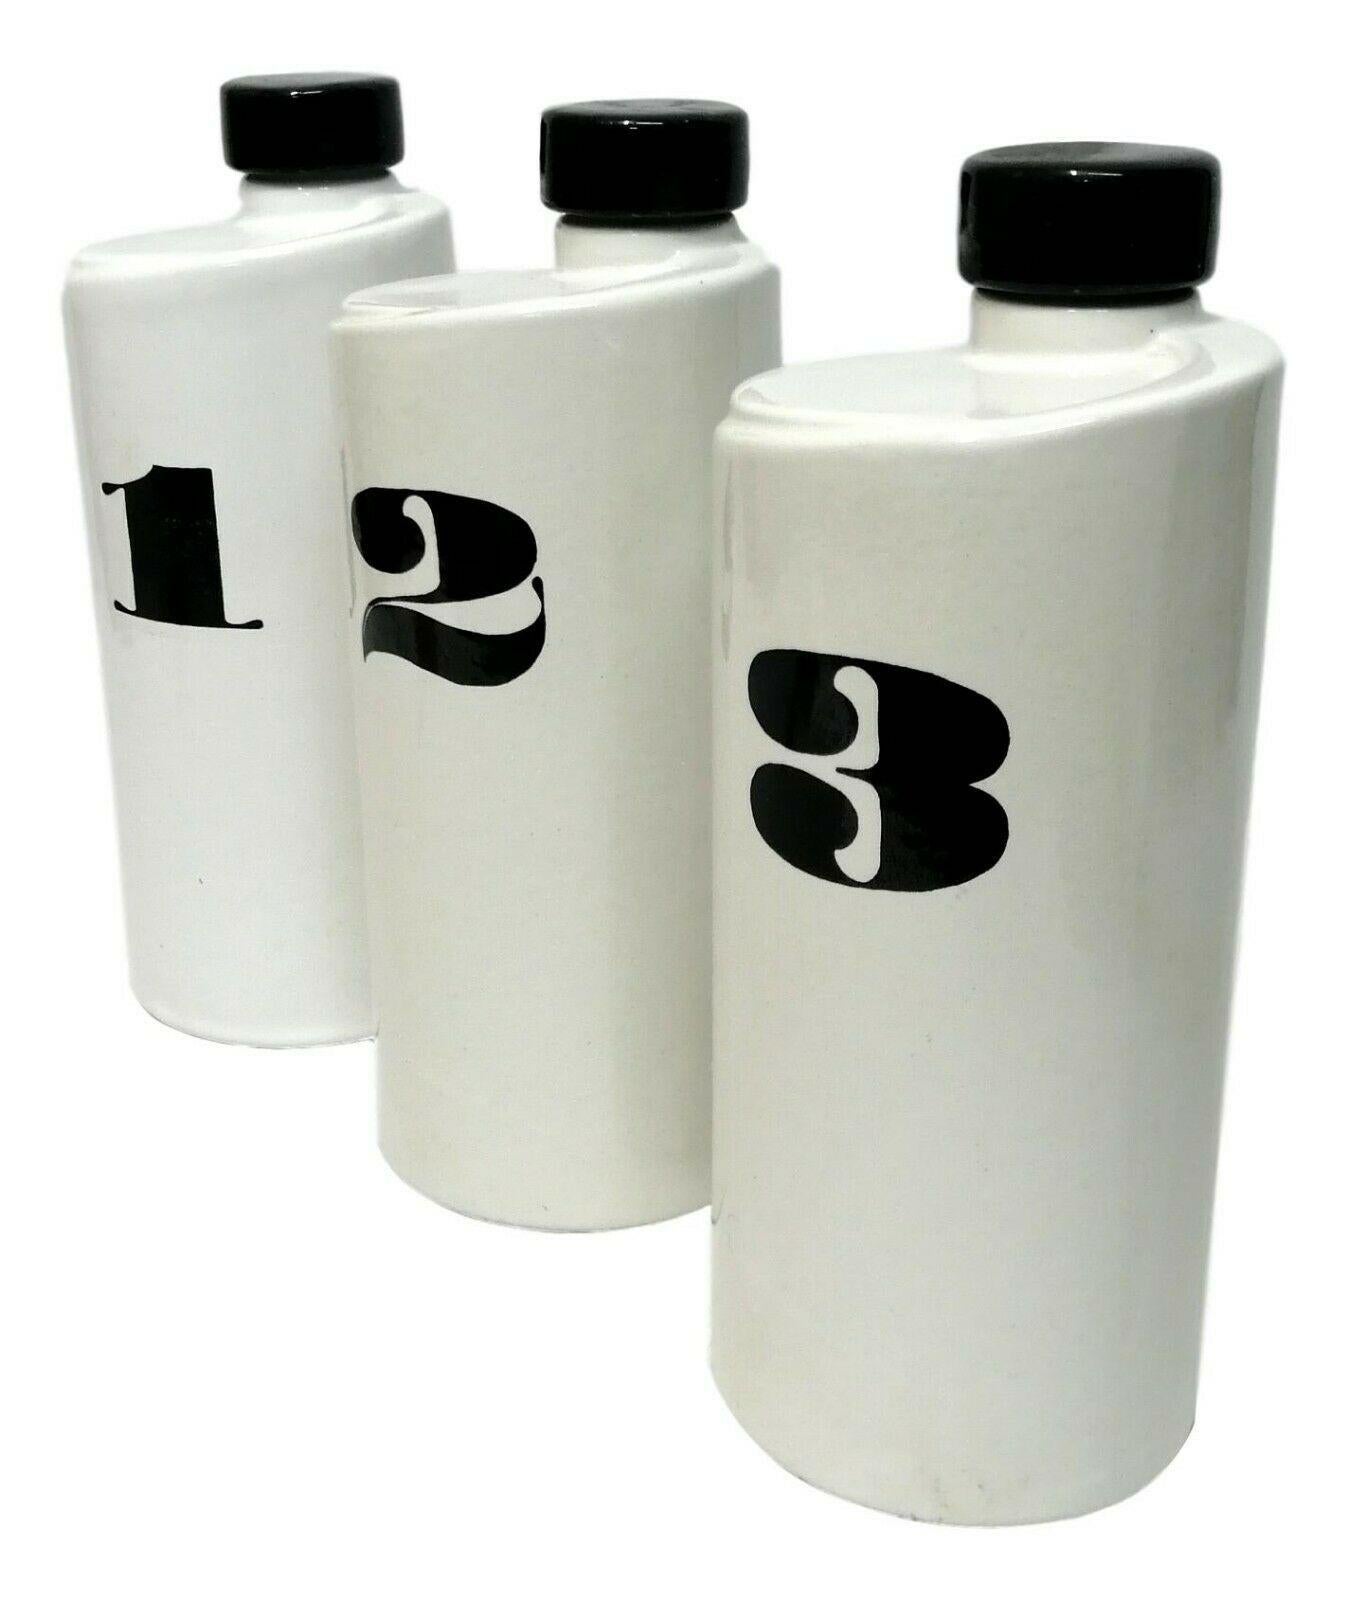 Rare triptych of 70s design ceramic bottles, probably Danish Milan production or Ceramiche pozzi (traces of the label under a bottle), with numbers 1,2,3 in black enamel on an absolute white background

They measure 25 cm in height by 10 cm in